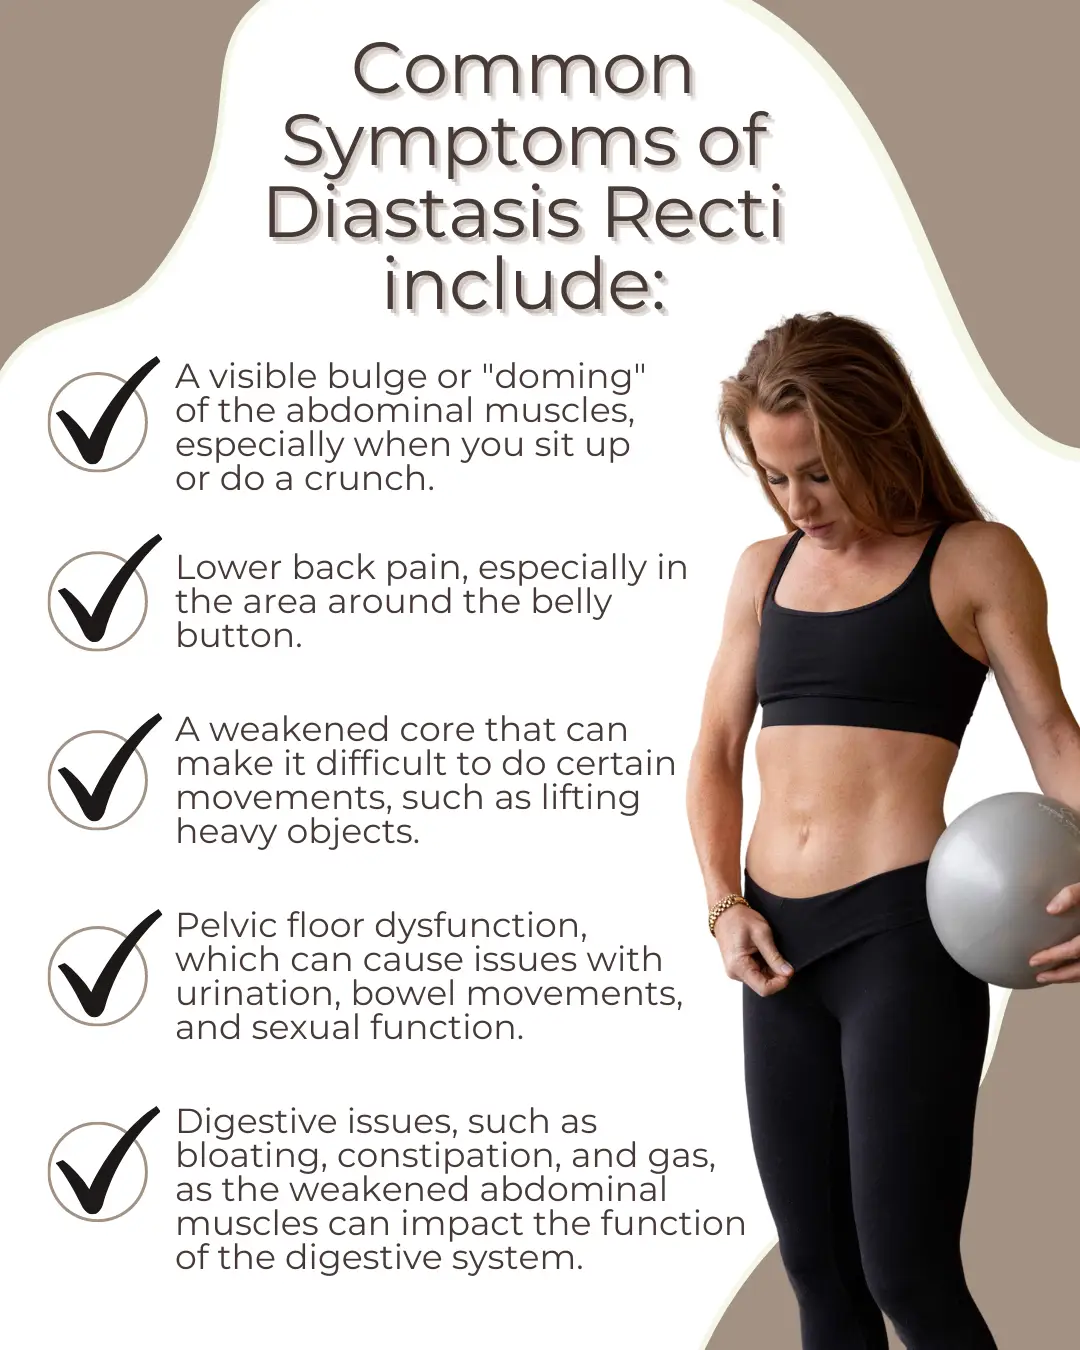 BS- These Leggings Can Help with Your Postpartum Diastasis Recti